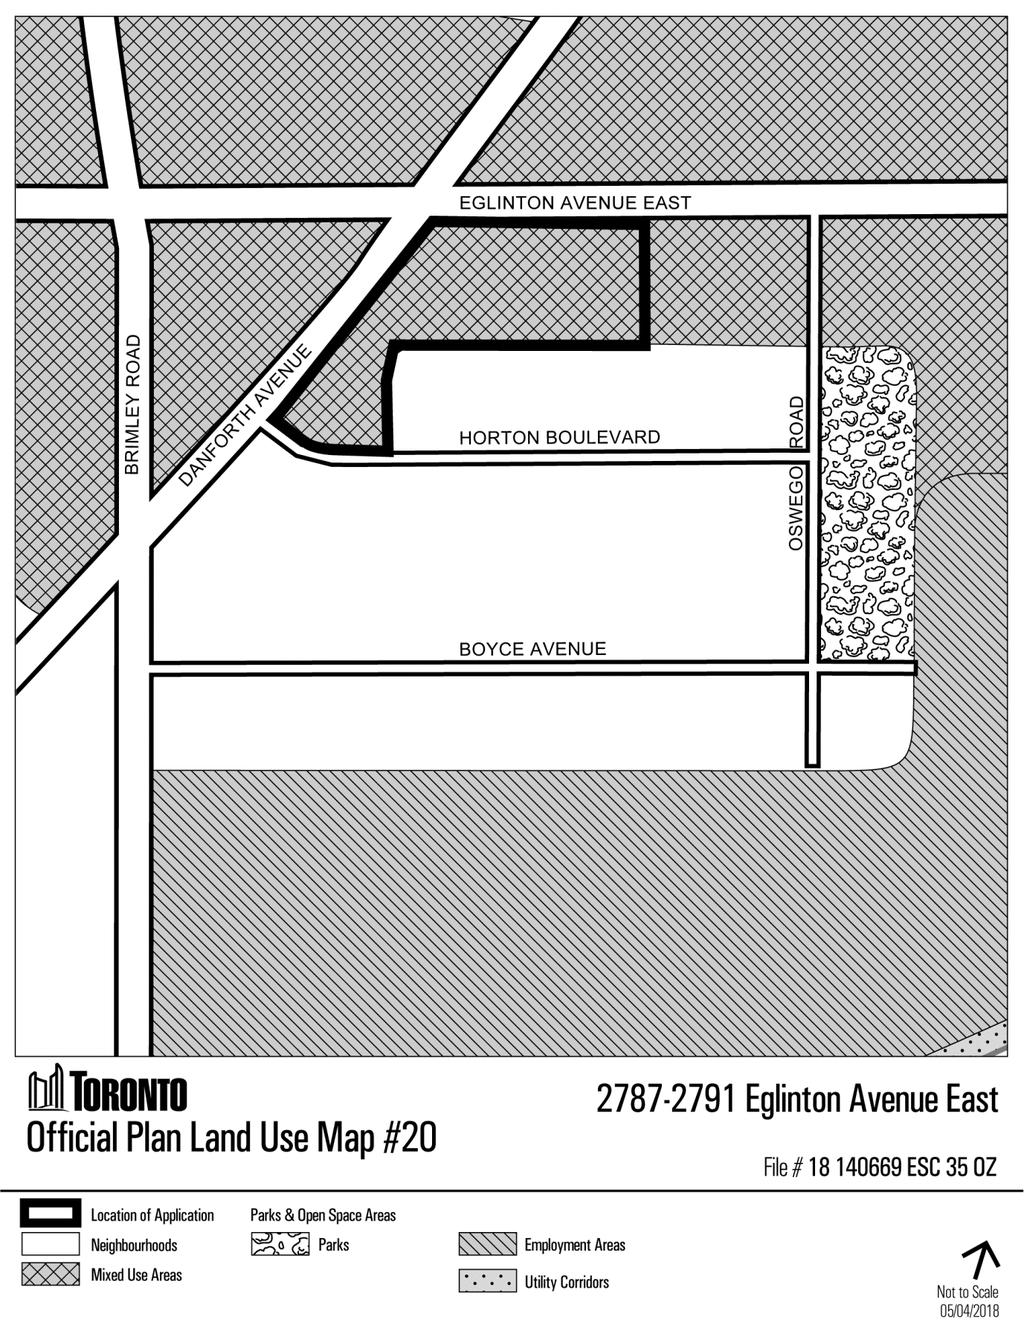 Attachment 5: Official Plan Land Use Map Request for Interim